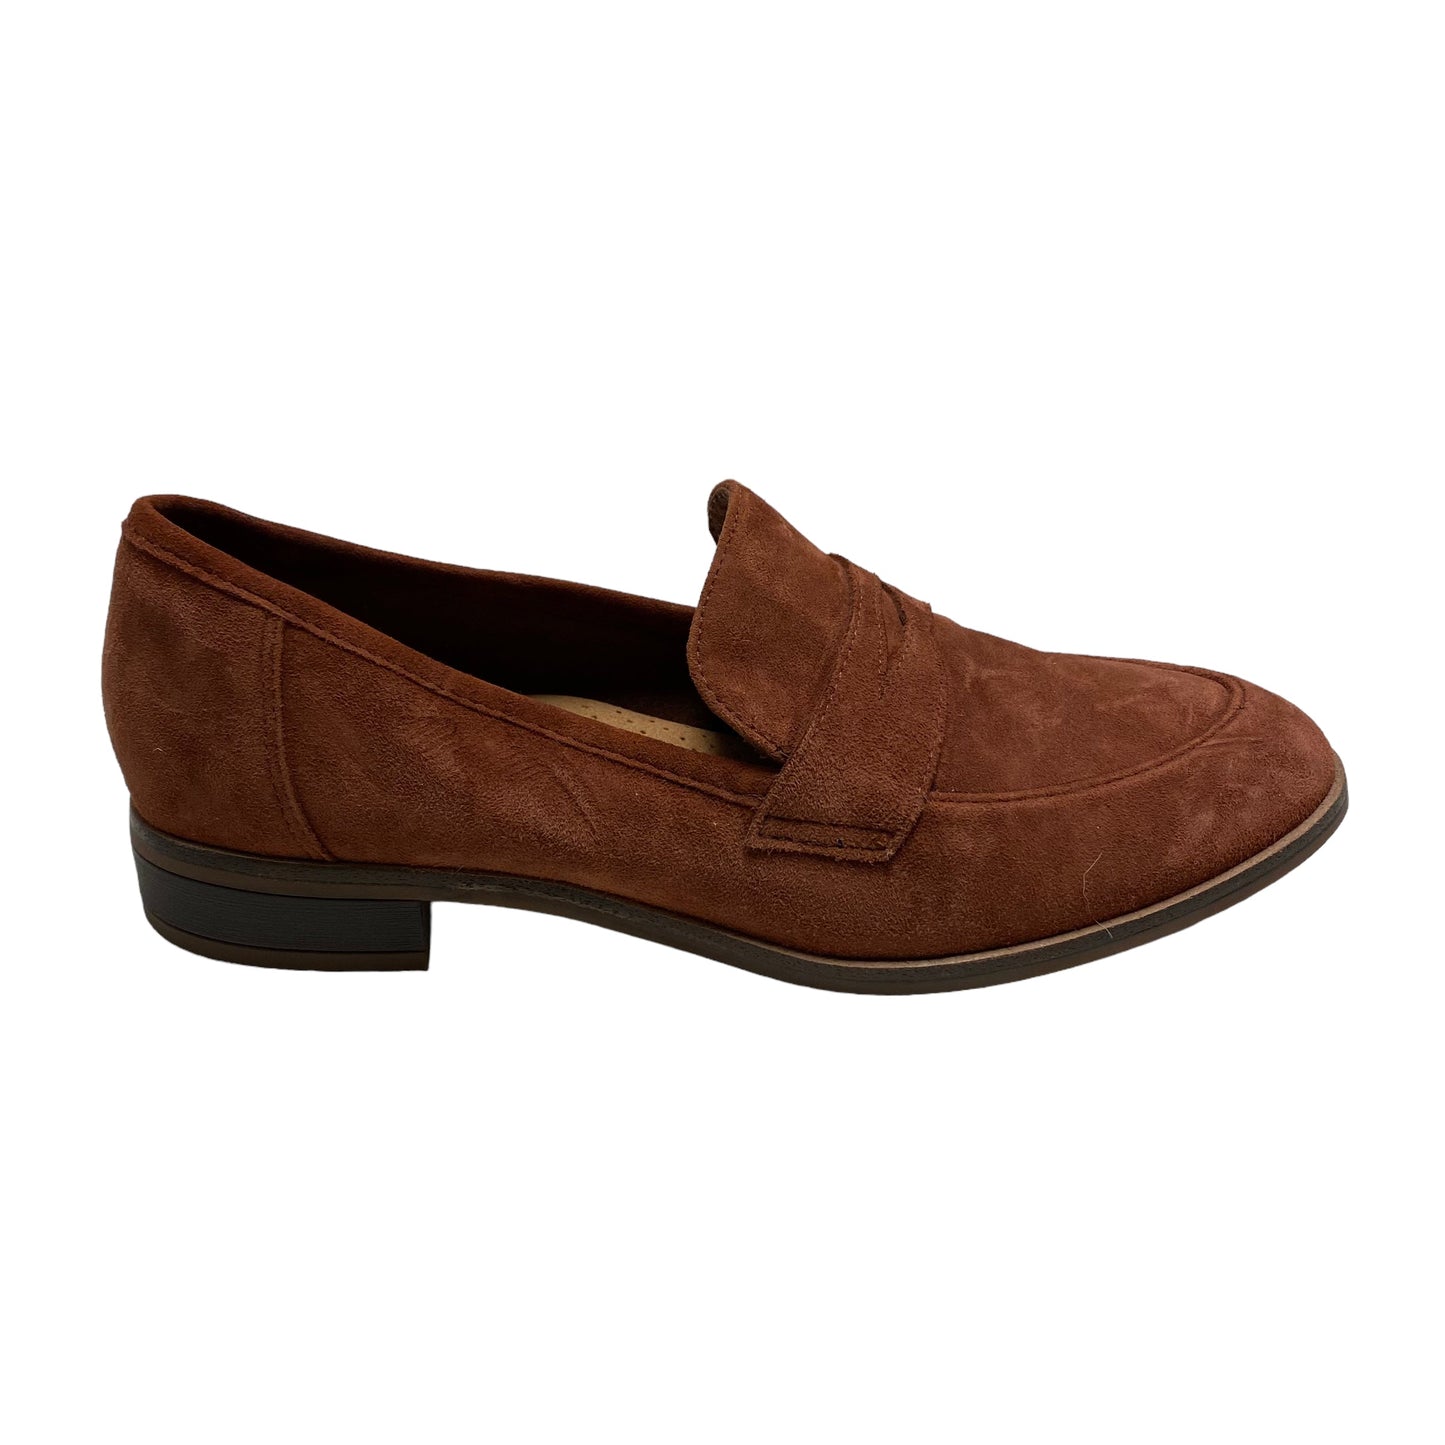 Shoes Flats Loafer Oxford By Clarks  Size: 8